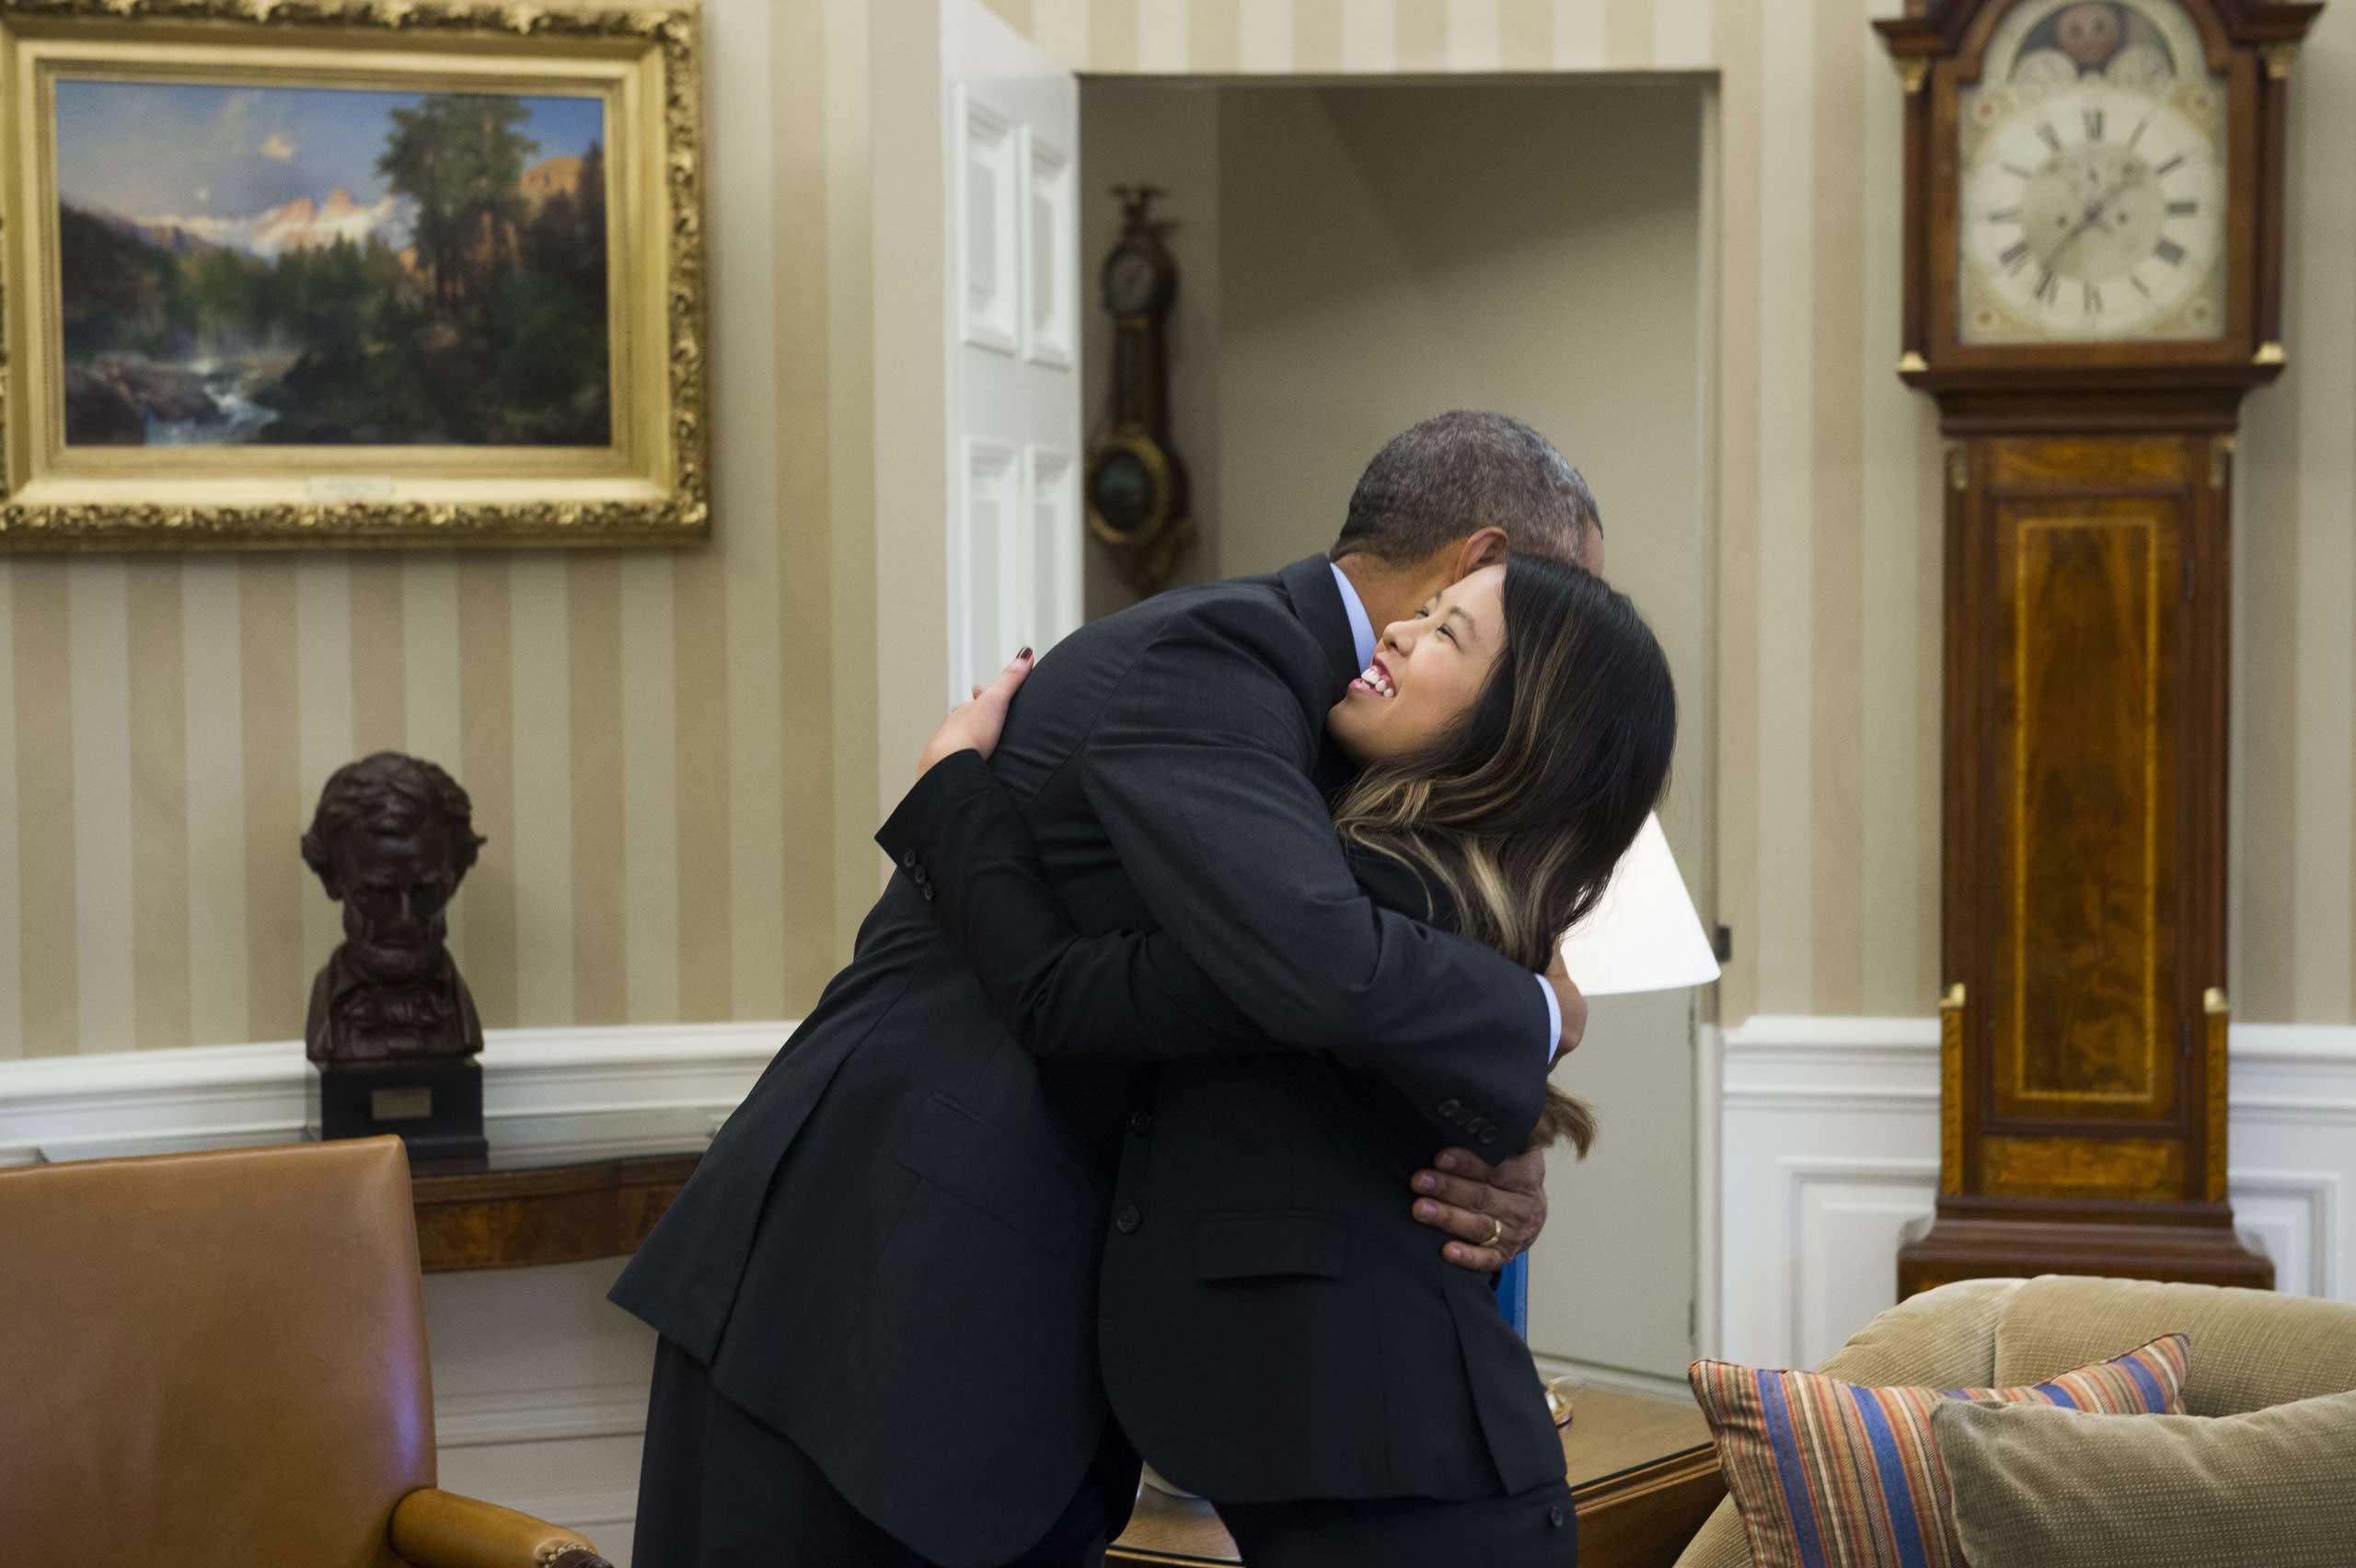 President Barack Obama hugs nurse Nina Pham, who was declared free of the Ebola virus after contracting the disease while caring for a Liberian patient in Texas, during a meeting in the Oval Office in Washington on Oct. 24, 2014.